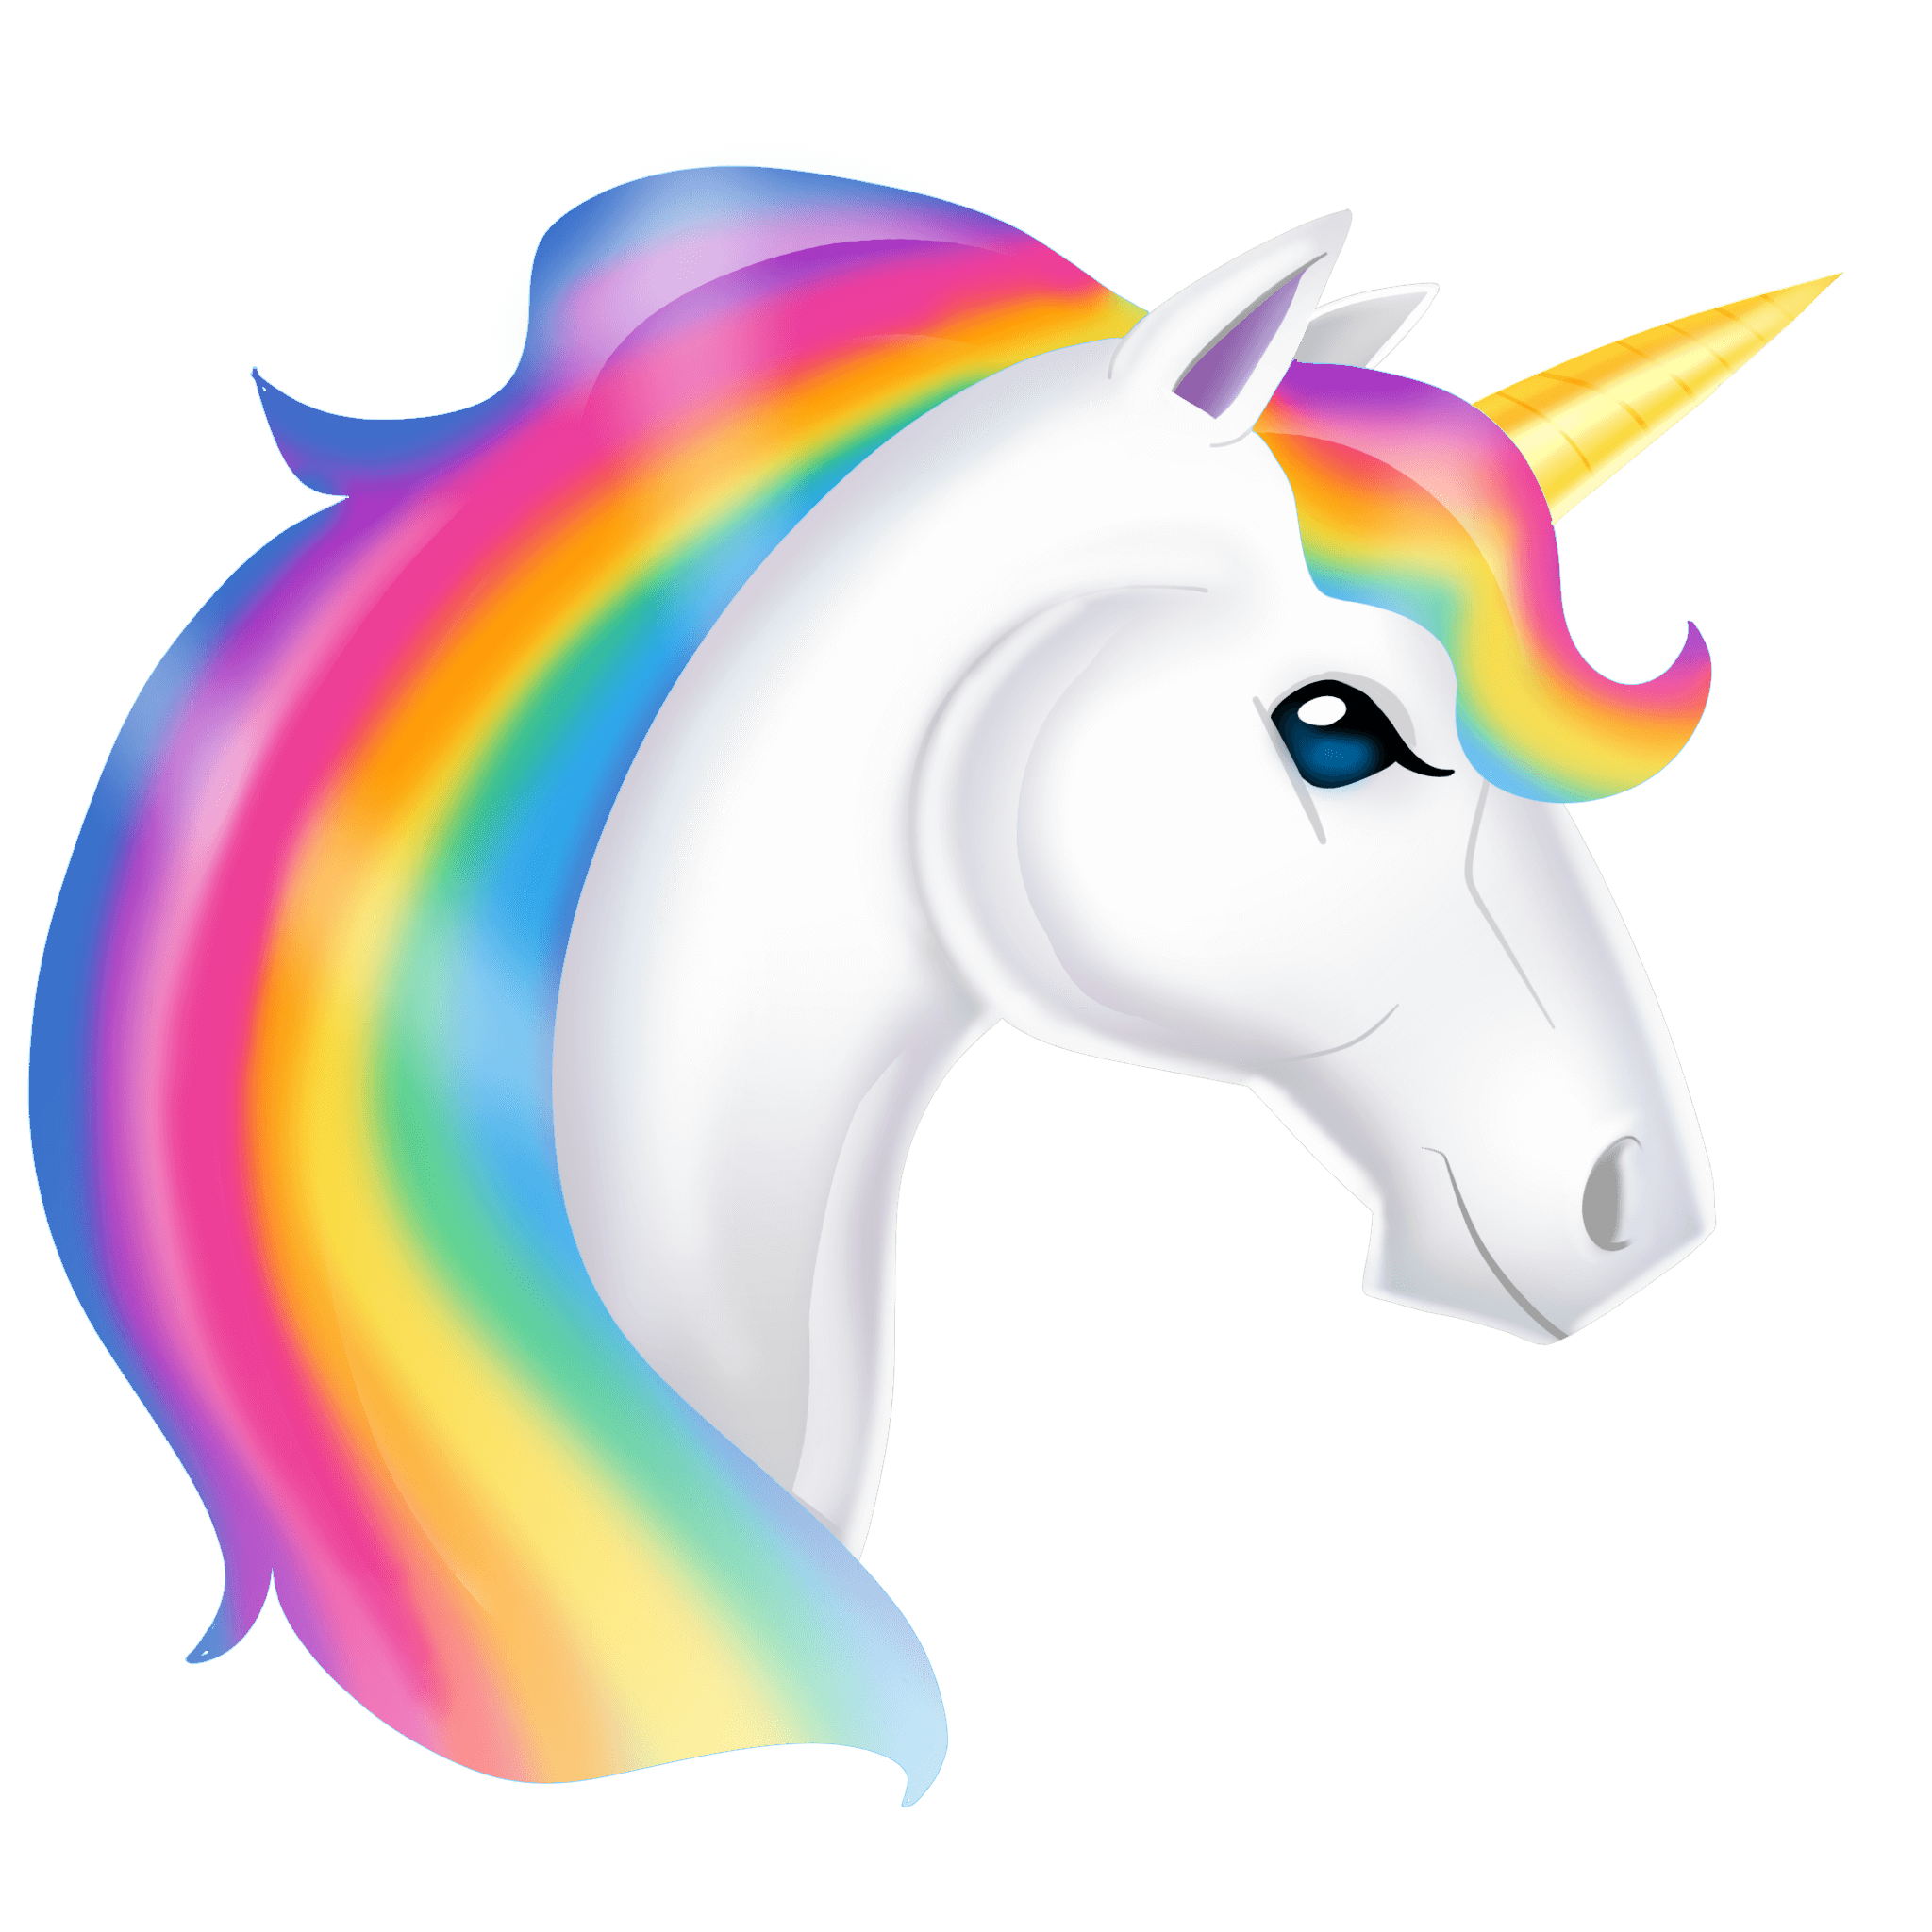 Download Free Unicorn PNG images, download unicorn.png - FreeIconsPNG